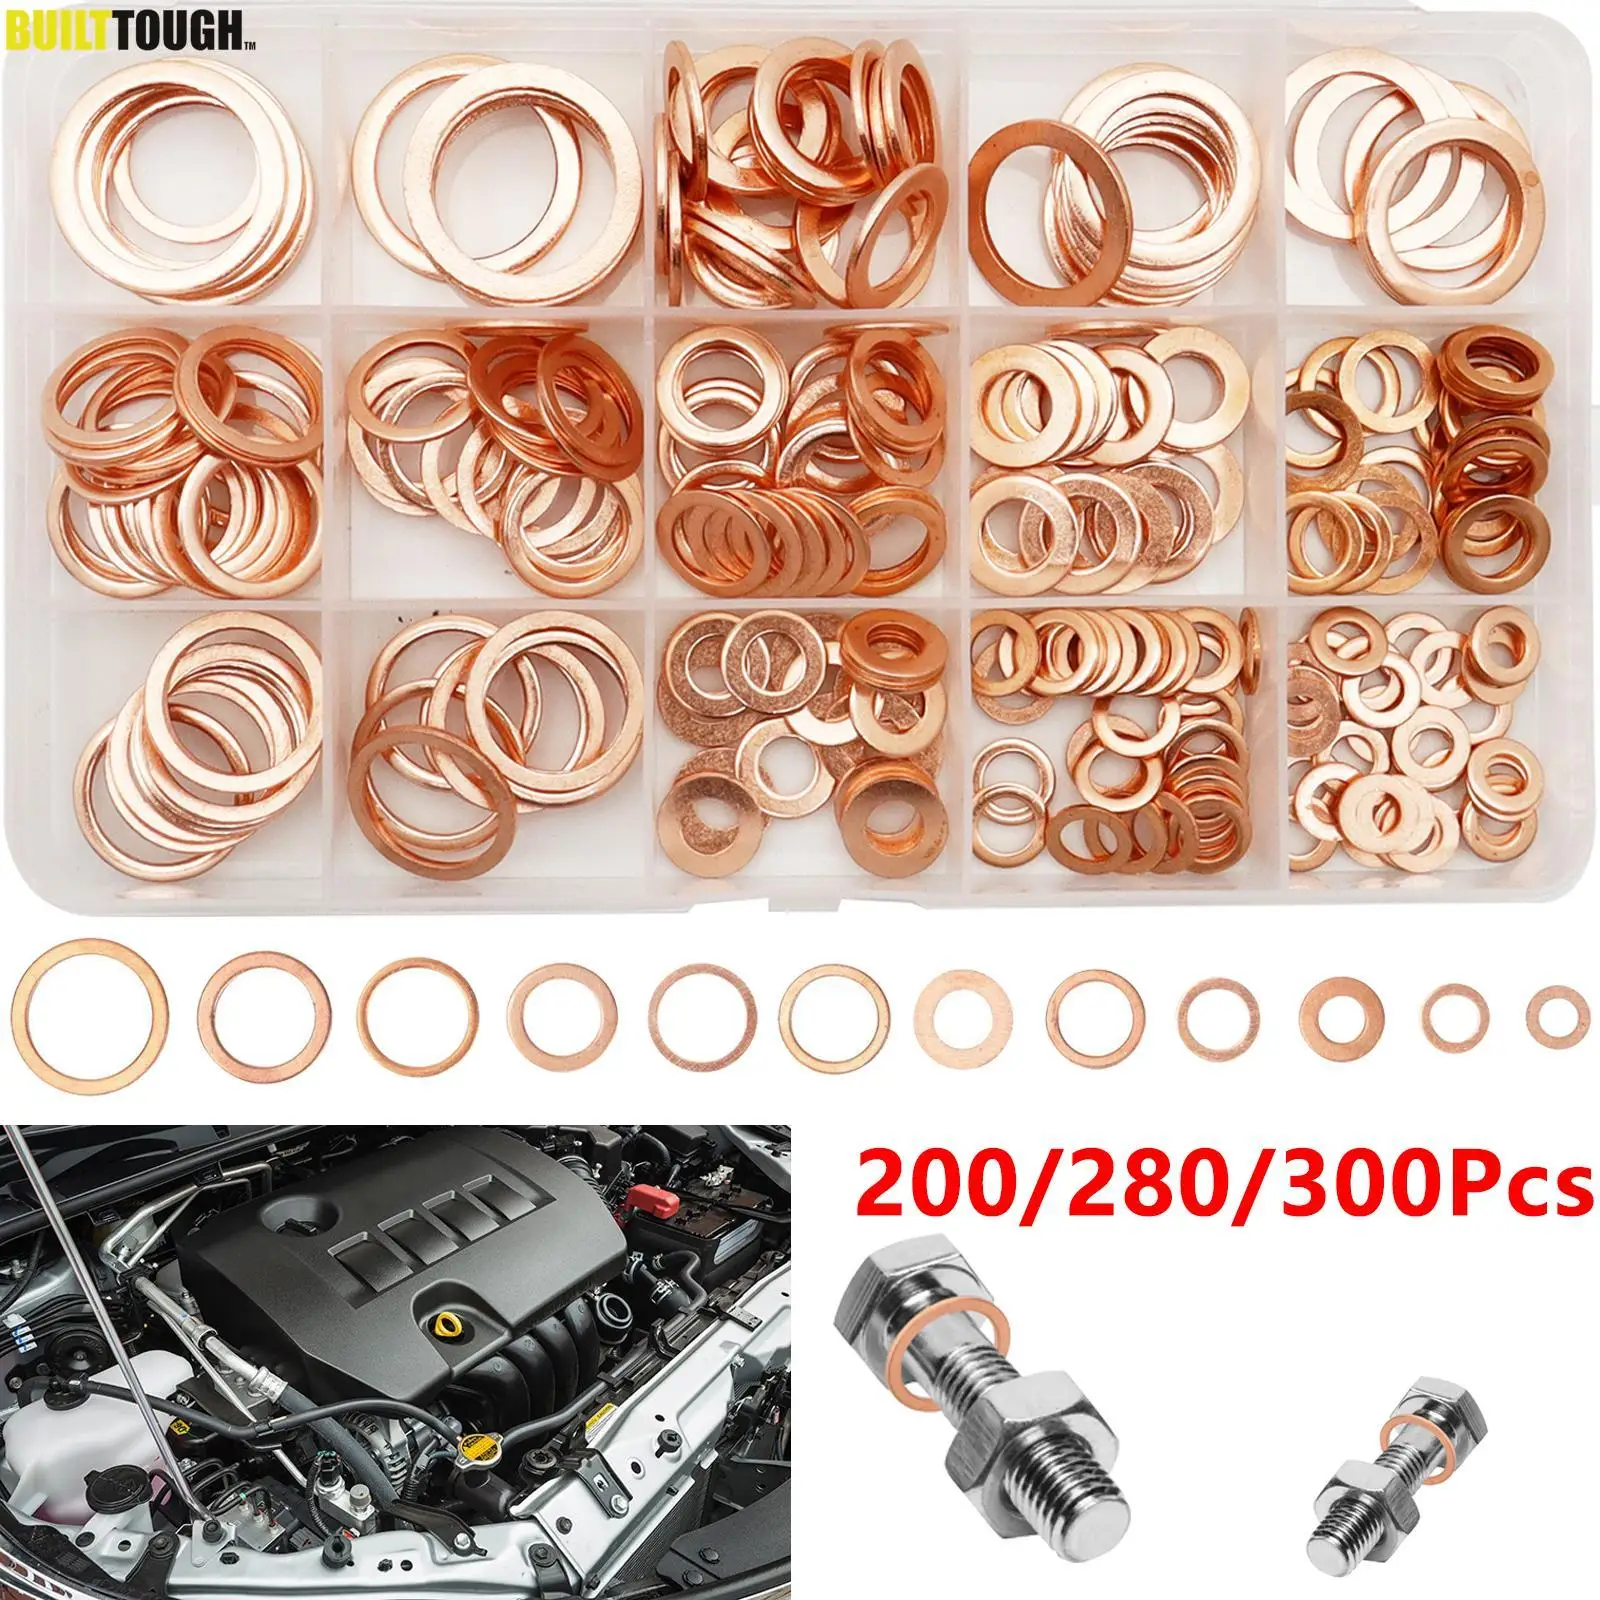 

300/280/200 Pcs Copper Sealing Solid Gasket Washer Sump Plug Oil For Boat Crush Flat Seal Ring Tool Hardware M5-M20 Accessories